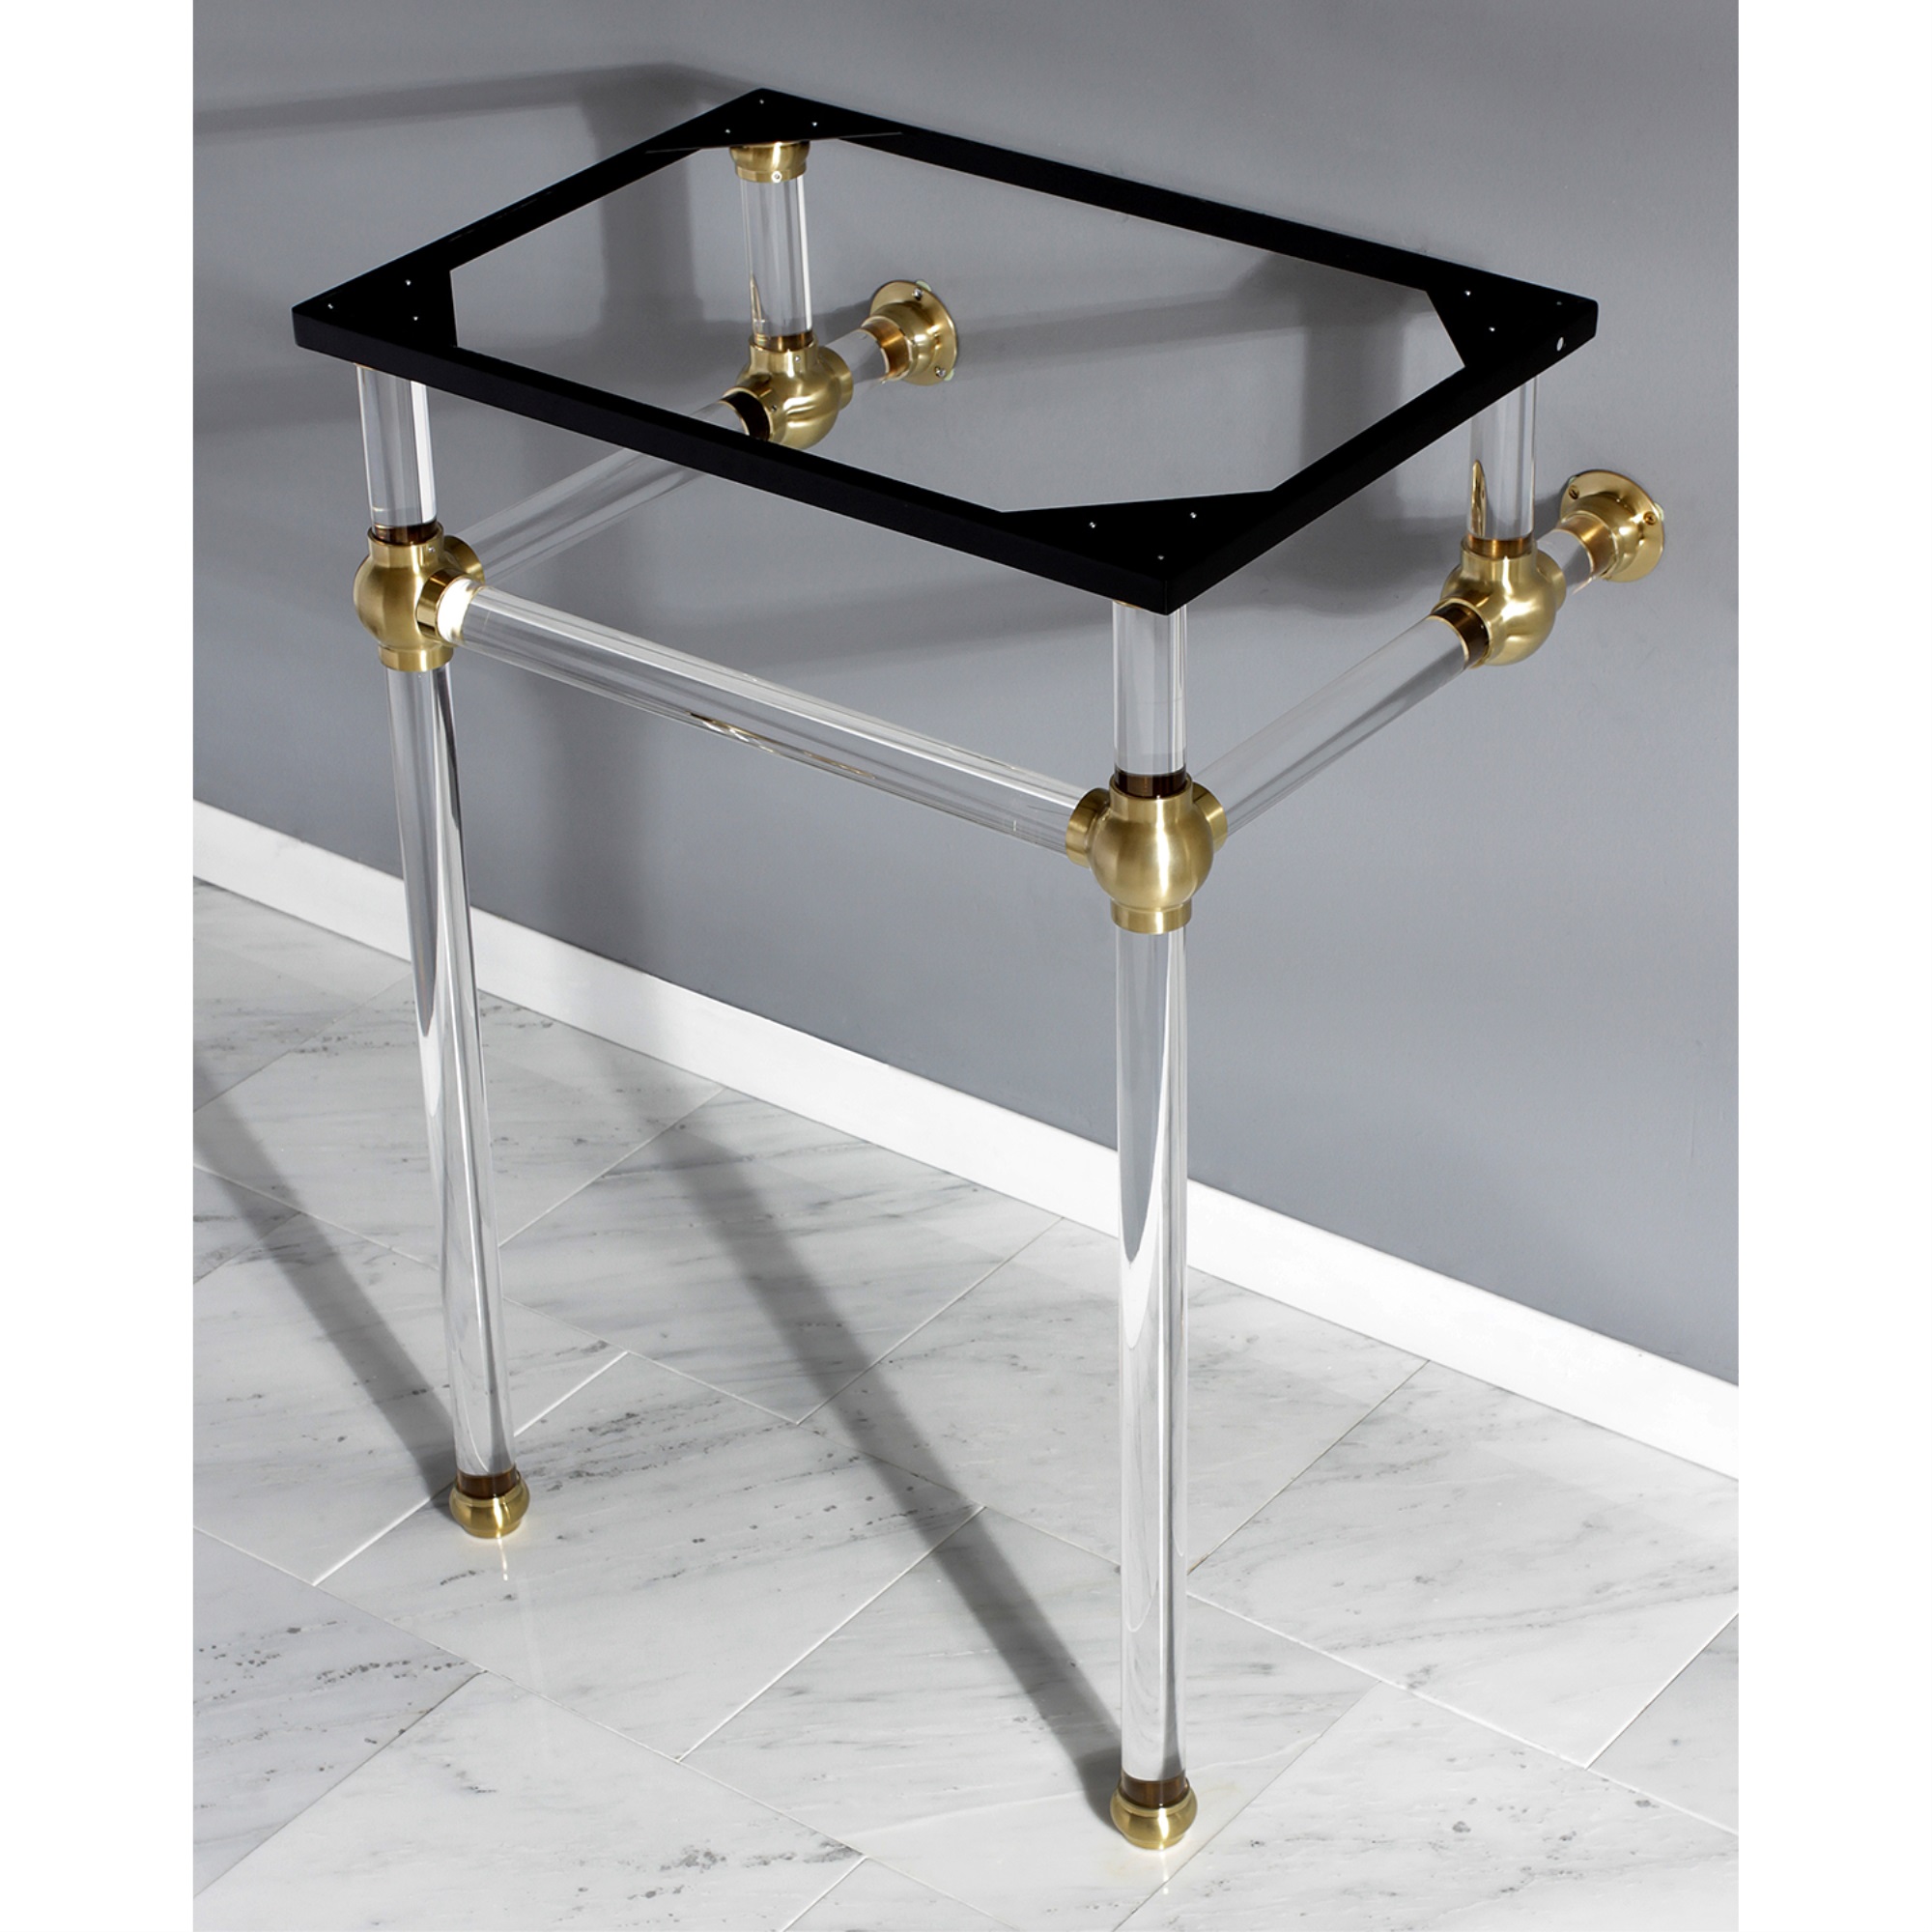 Fauceture Kingston Brass VAH282033SB Templeton 24-Inch x 20-3/8-Inch x 33-3/16-Inch Acrylic Console Sink Legs, Brushed Brass